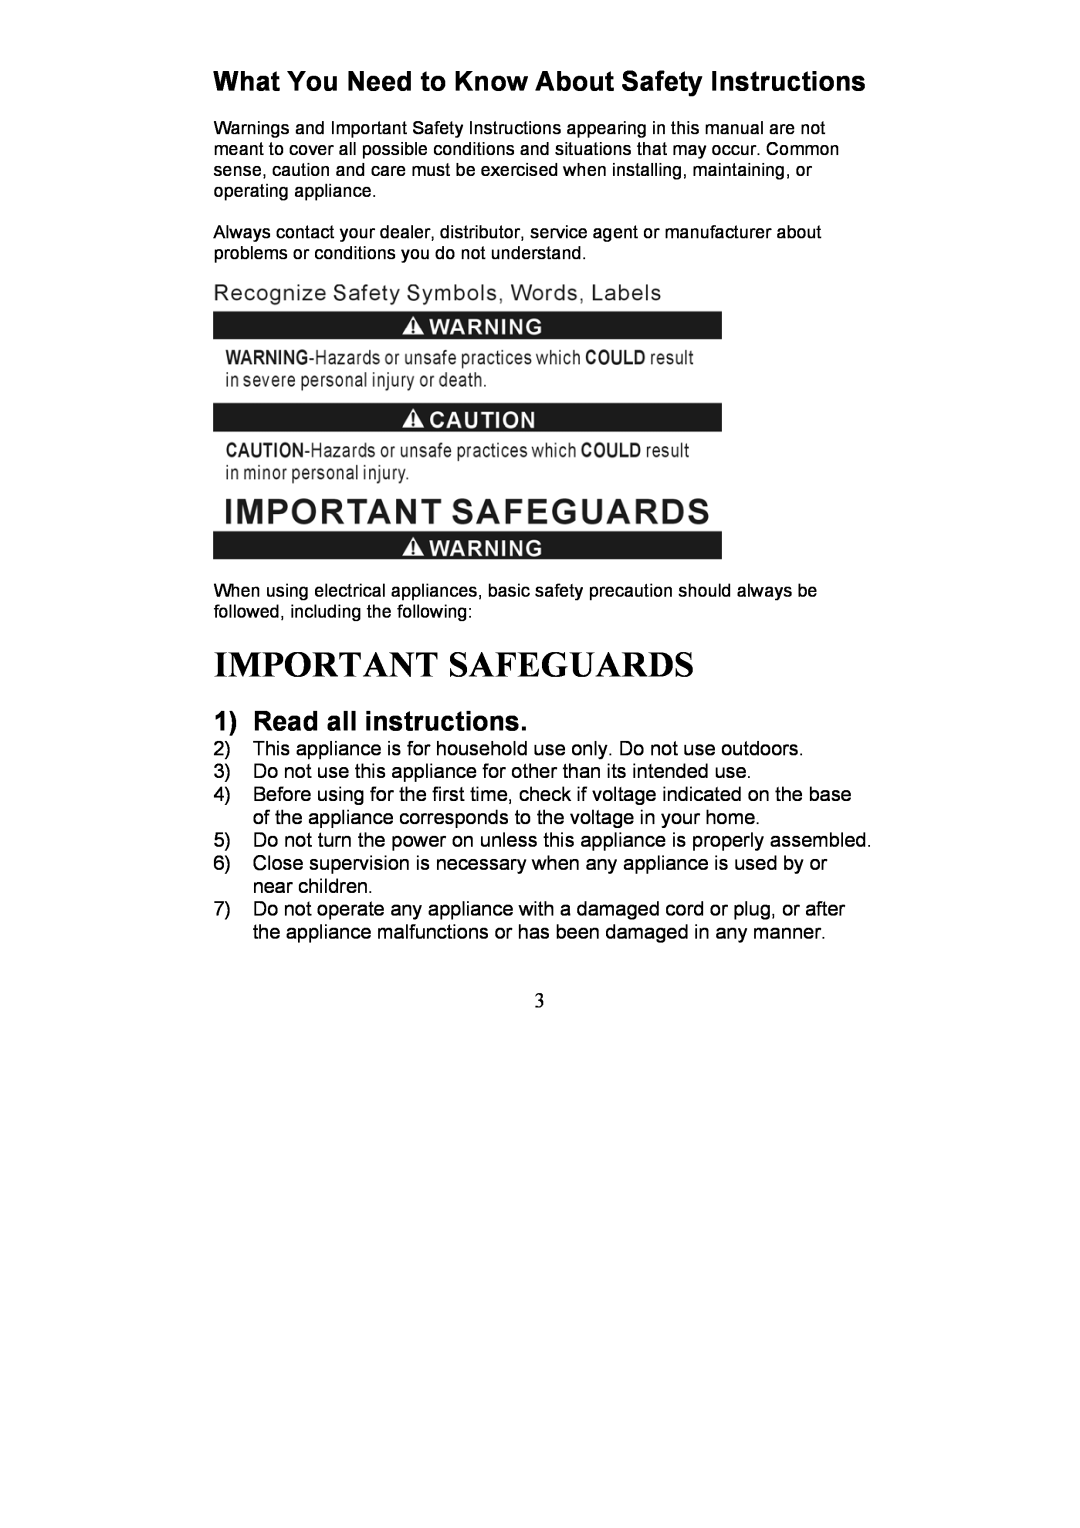 Magic Chef EWCM11TS12 Important Safeguards, What You Need to Know About Safety Instructions, Read all instructions 